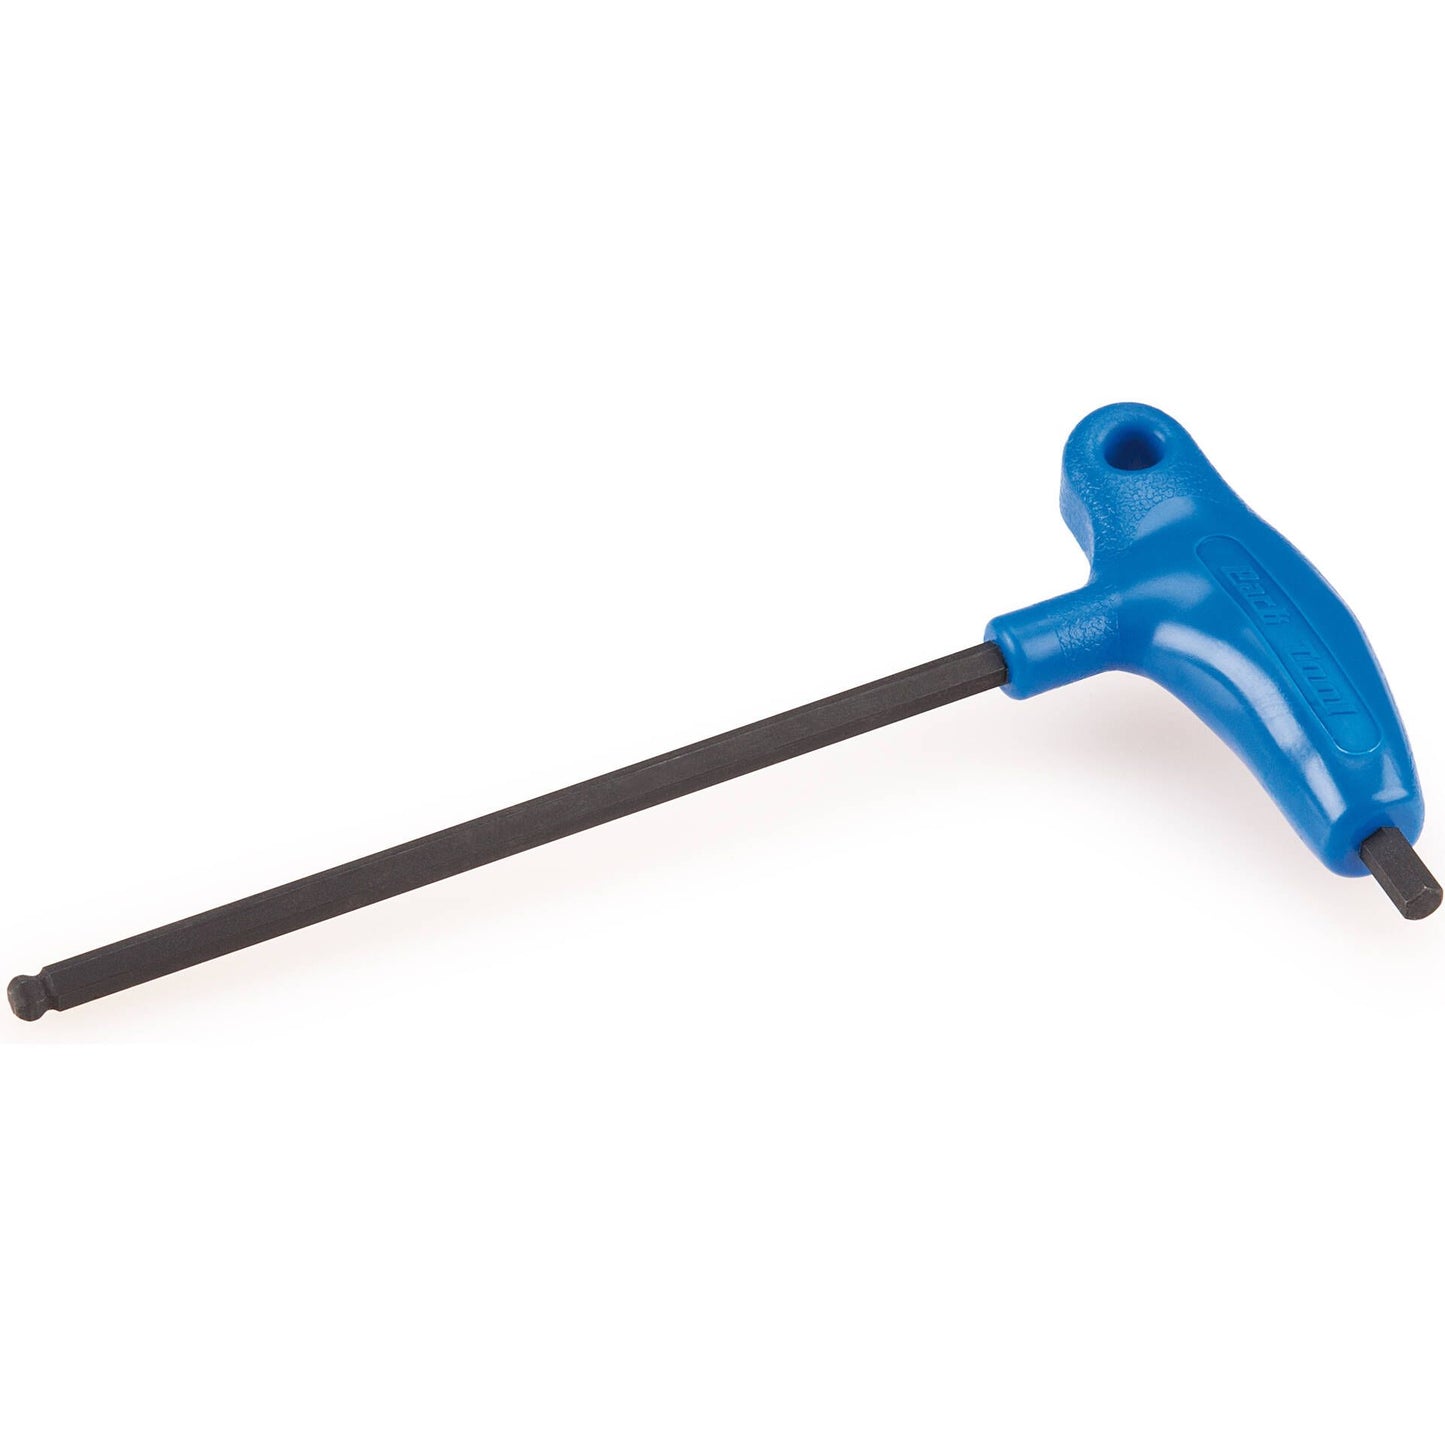 PARK TOOL, PH-6, P-HANDLED HEX WRENCH, 6MM